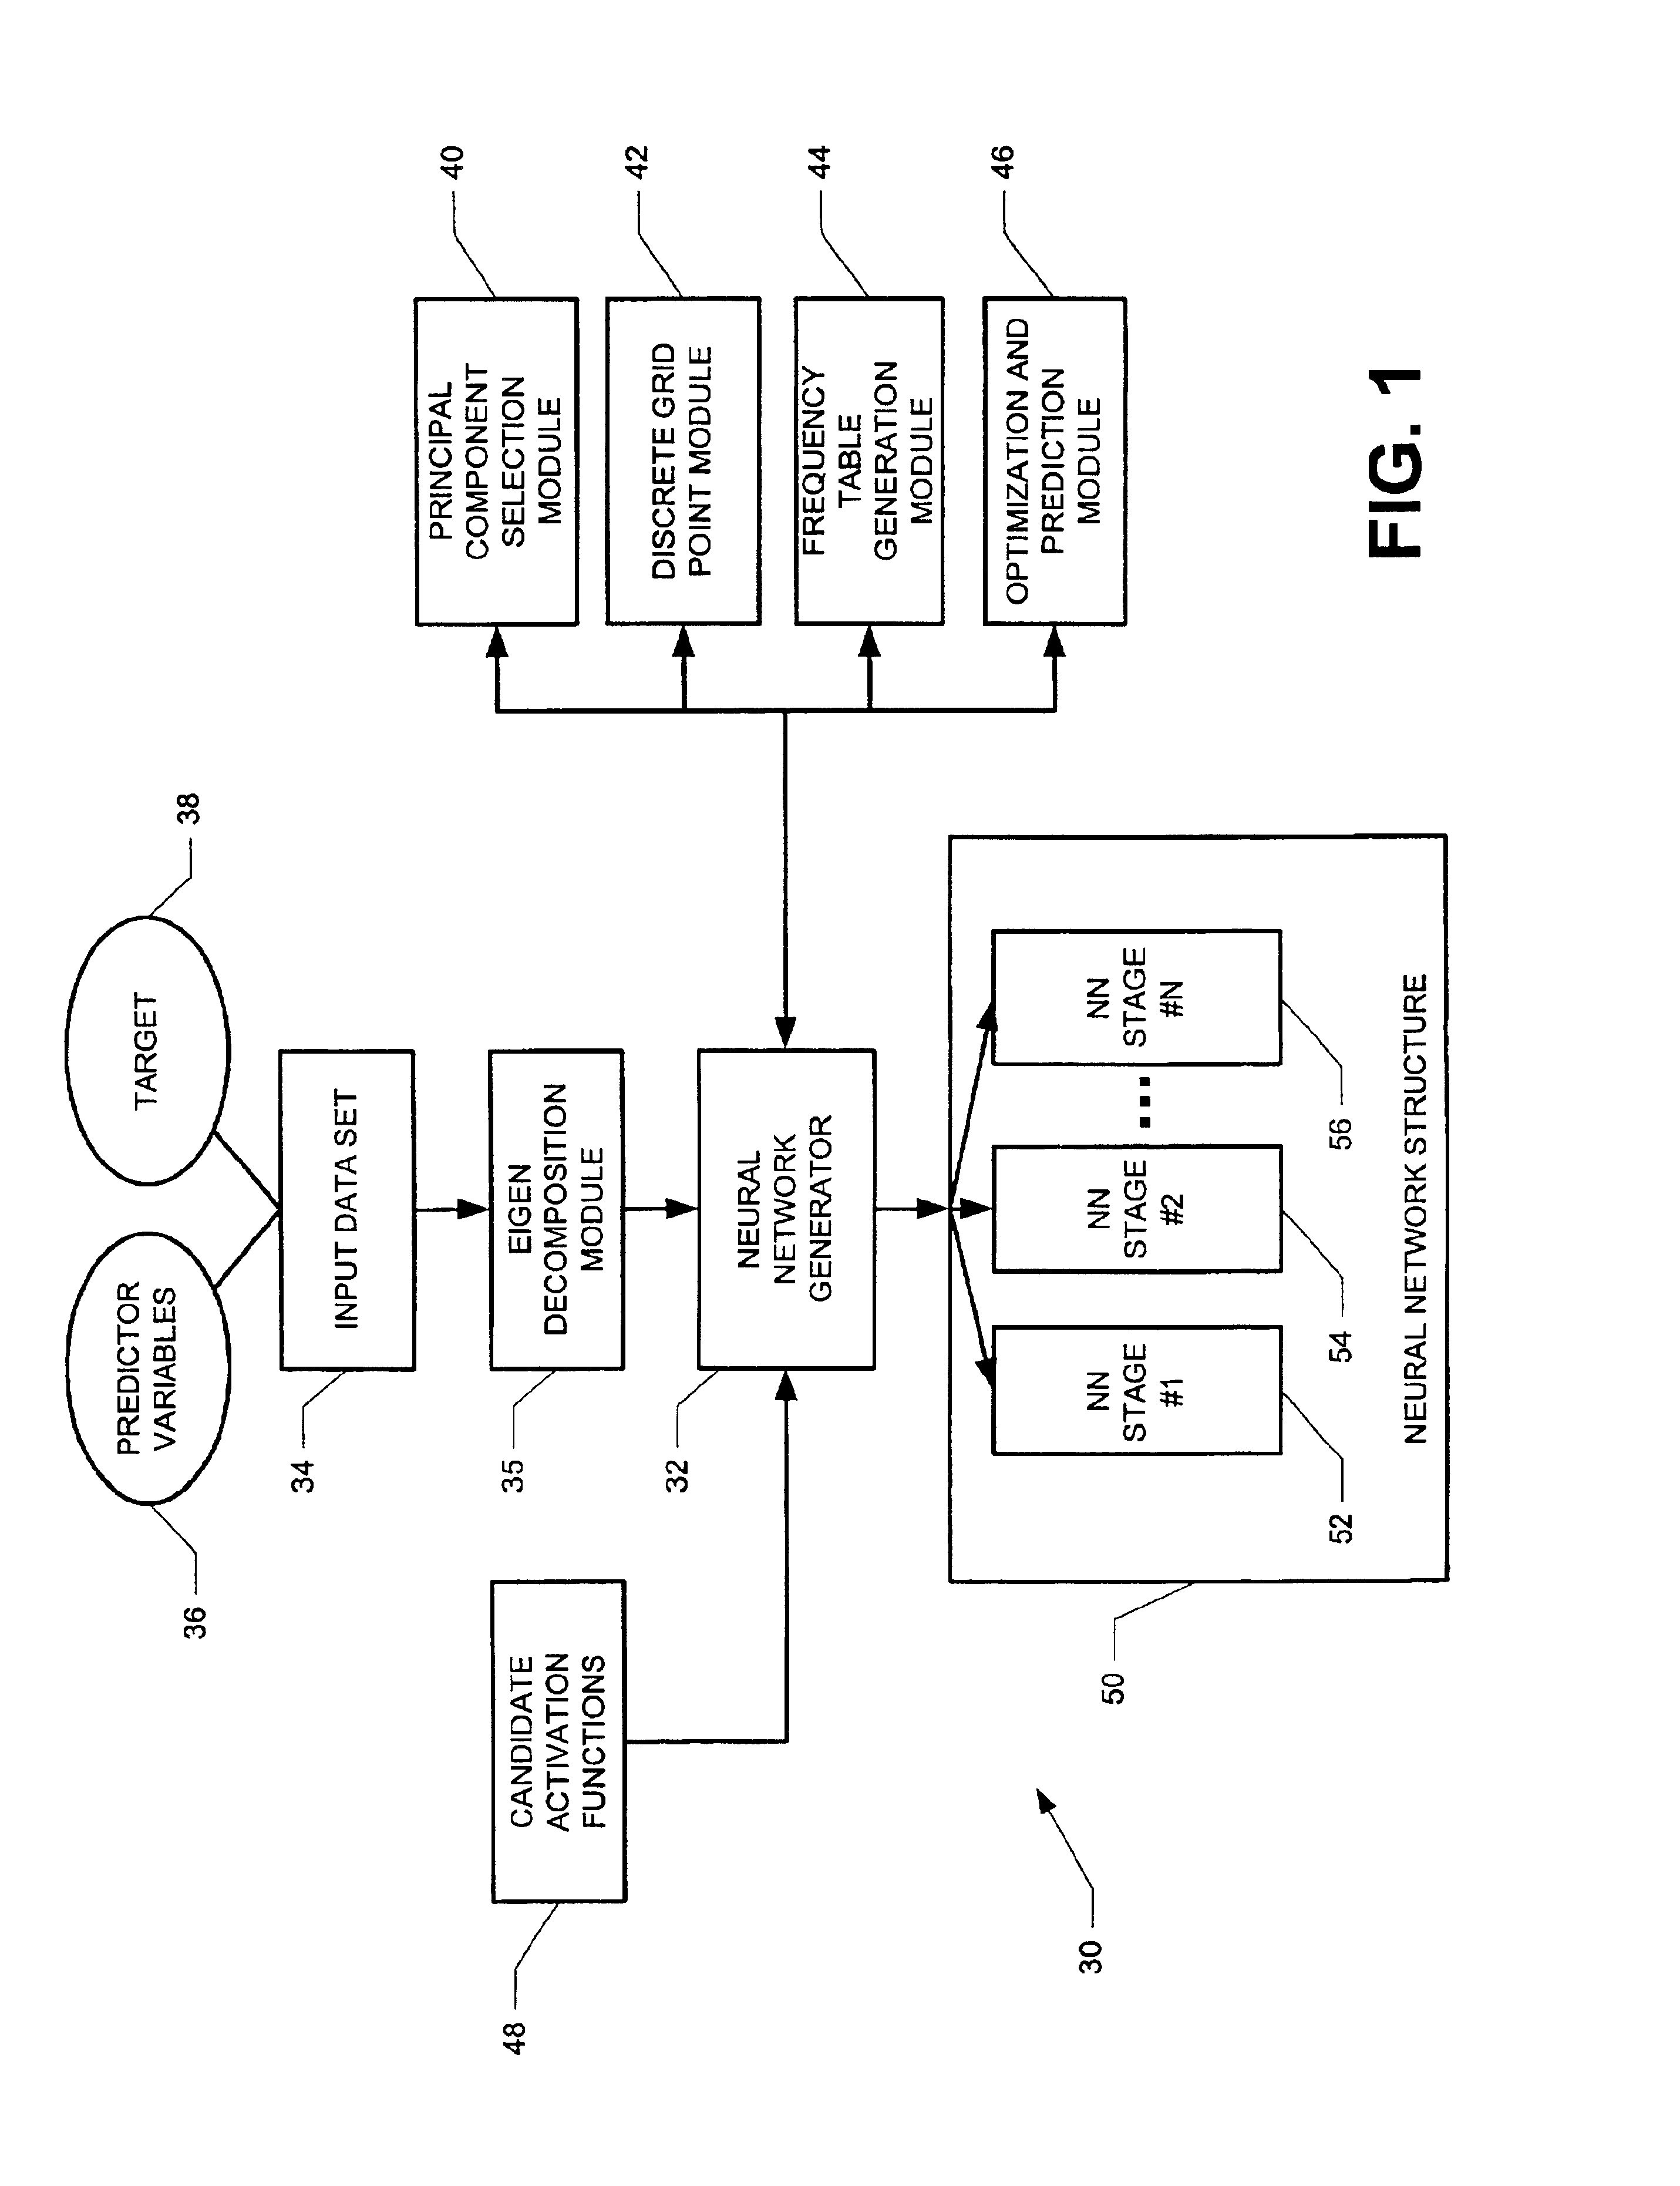 Hybrid neural network generation system and method